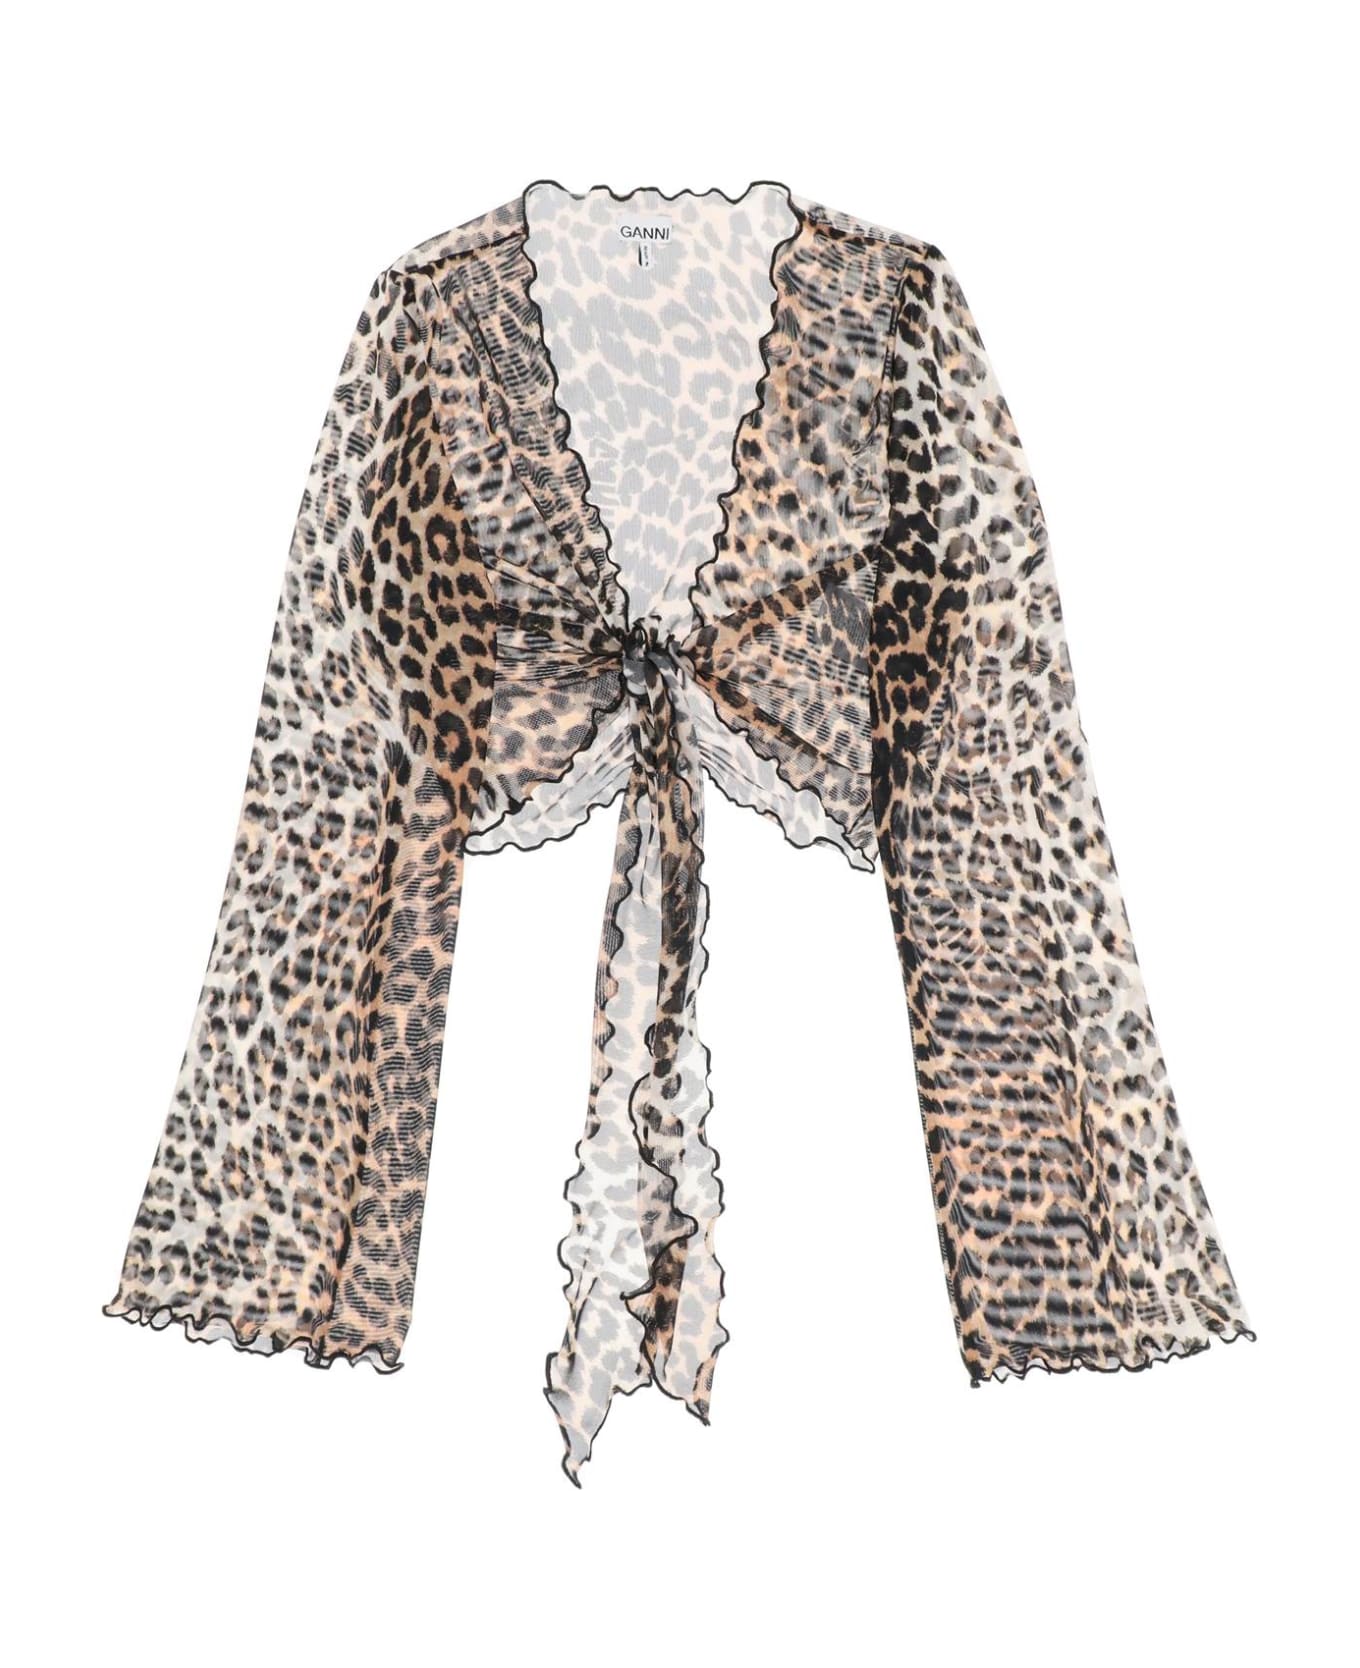 Ganni Cover Up Cropped Top In Mesh With Leopard Print - LEOPARD (Beige) トップス